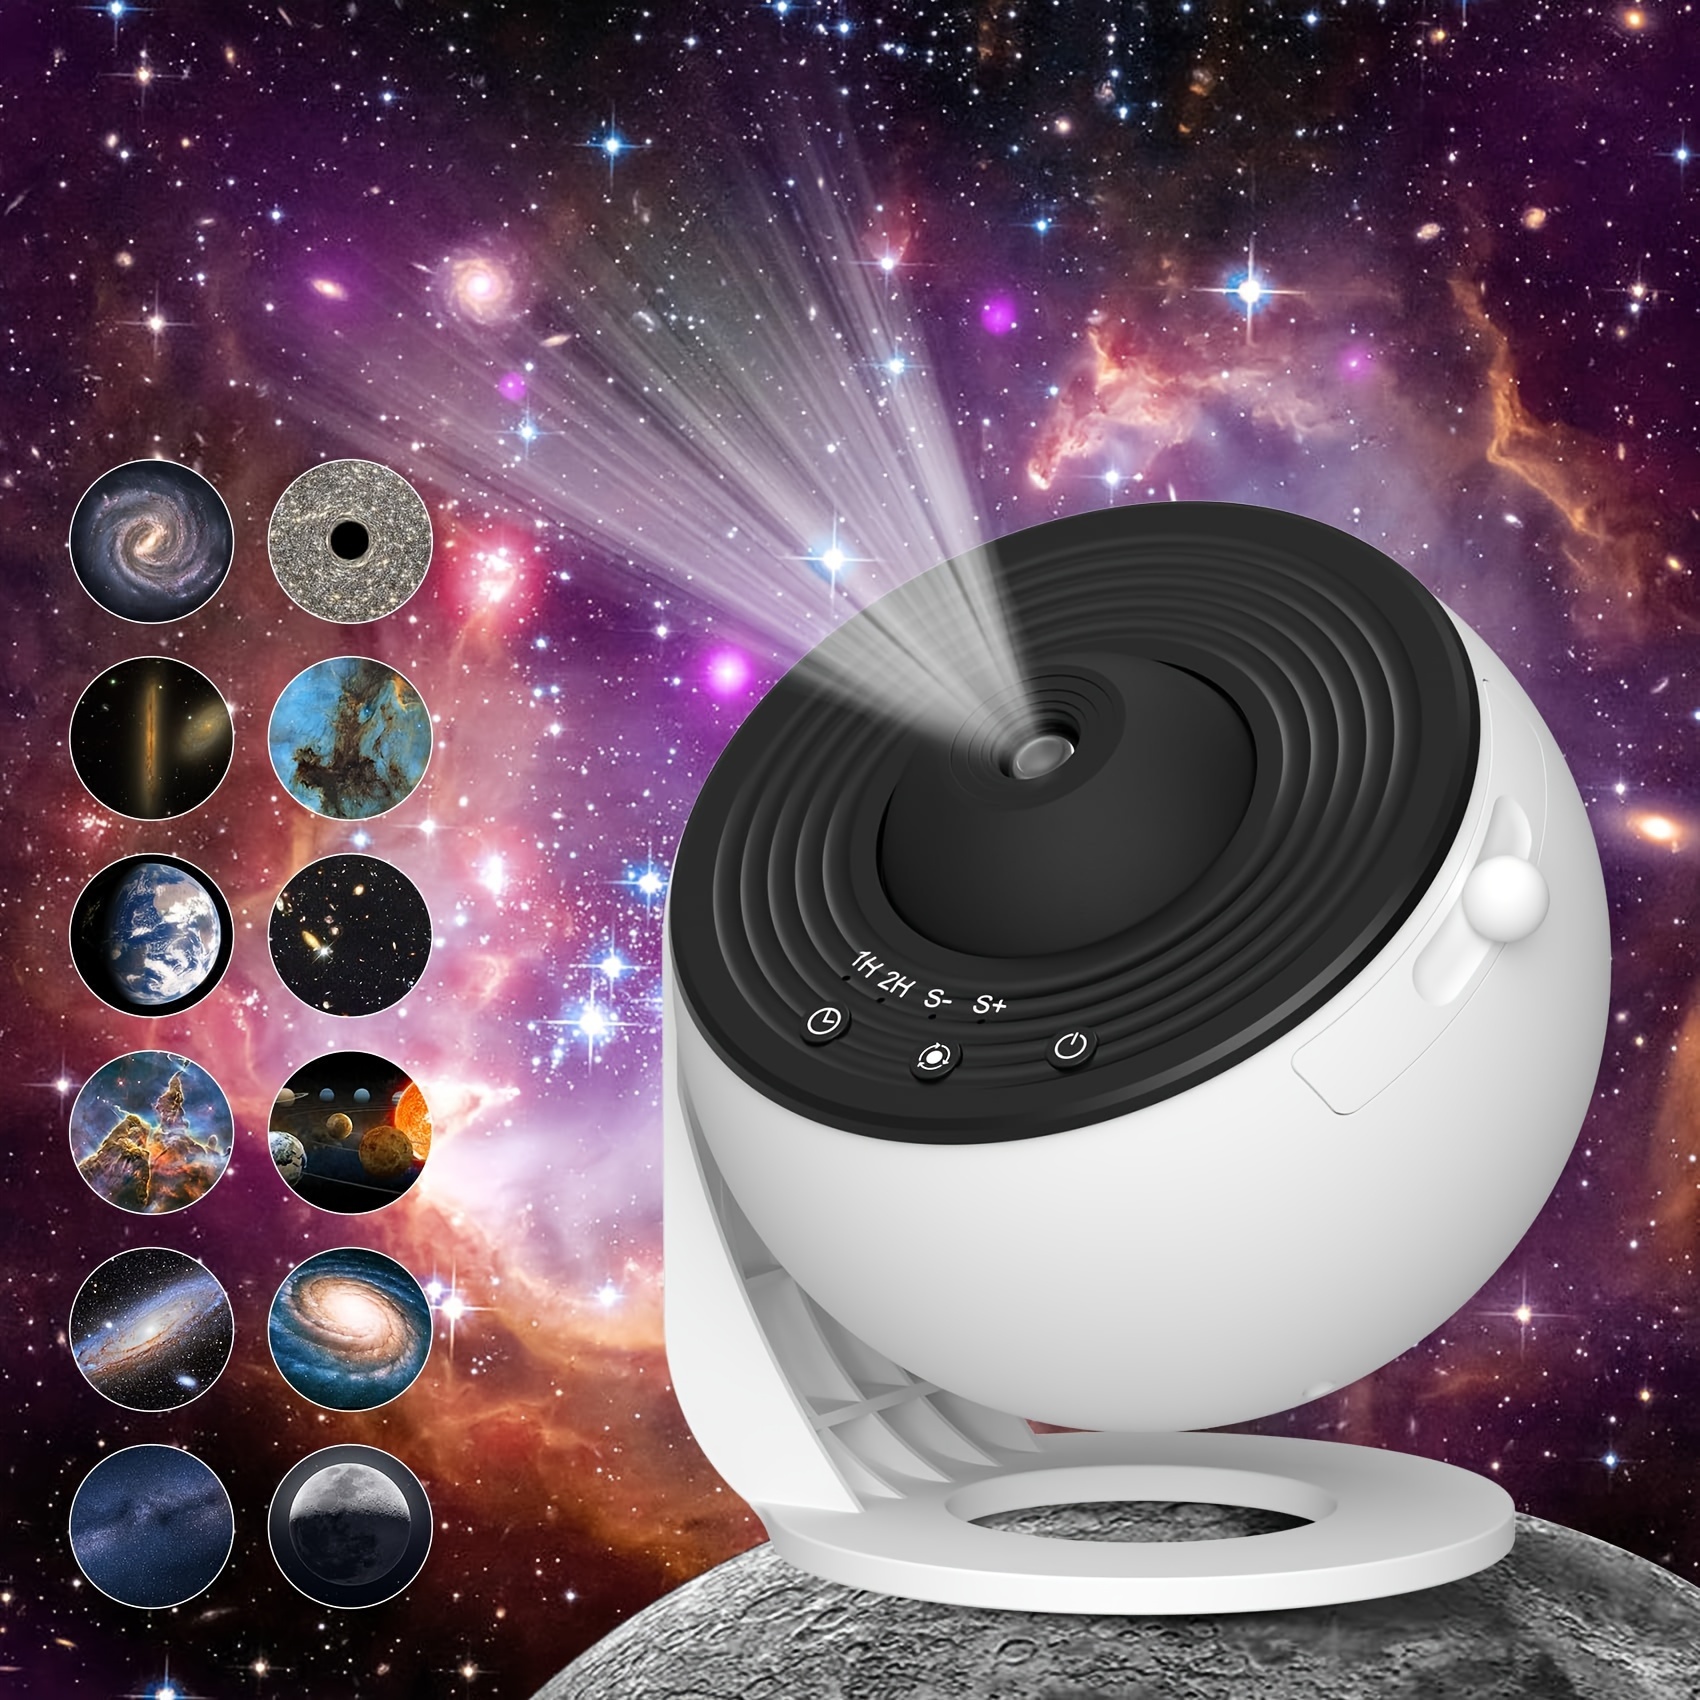 

Galaxy Projector For Bedroom, Hd Image Star Projector Galaxy Light Adjustable Knob, 13 Film Discs Planetarium Projector, 360° Rotating 1/2h Timer Simple 3-button Control